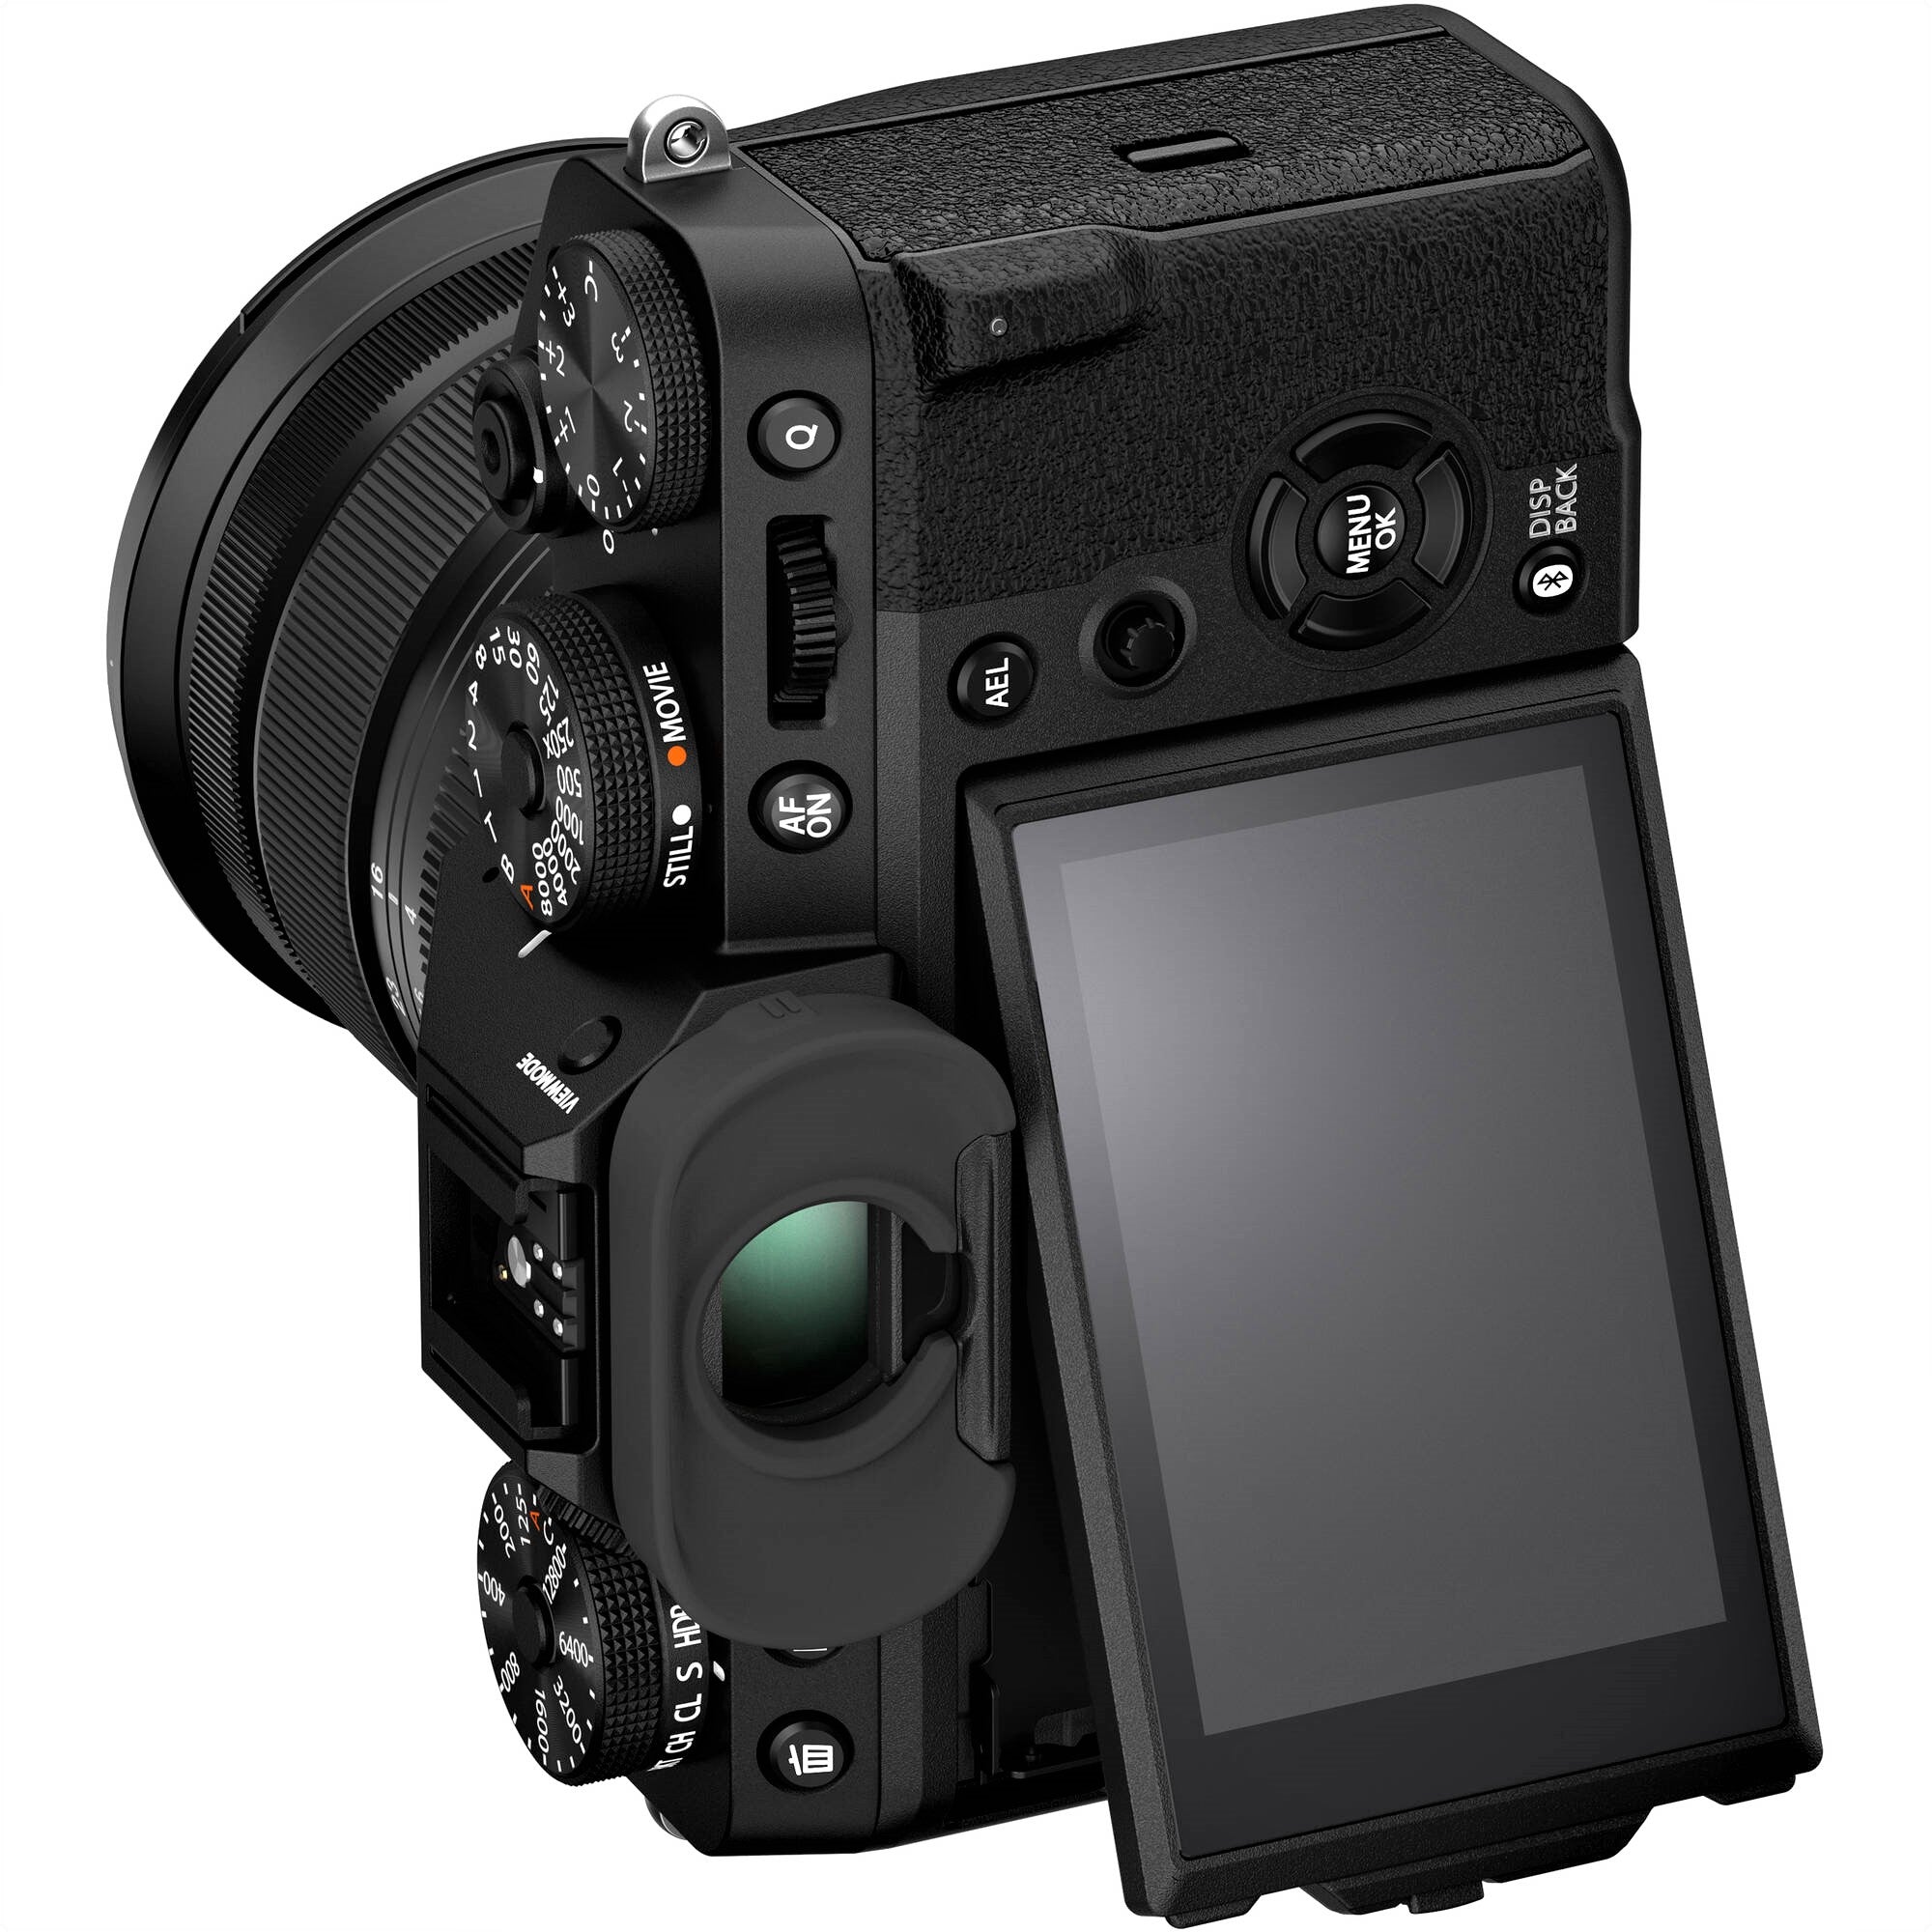 Fujifilm X-T5 Mirrorless Camera with 16-80mm Lens (Black) with its screen (Vertical)